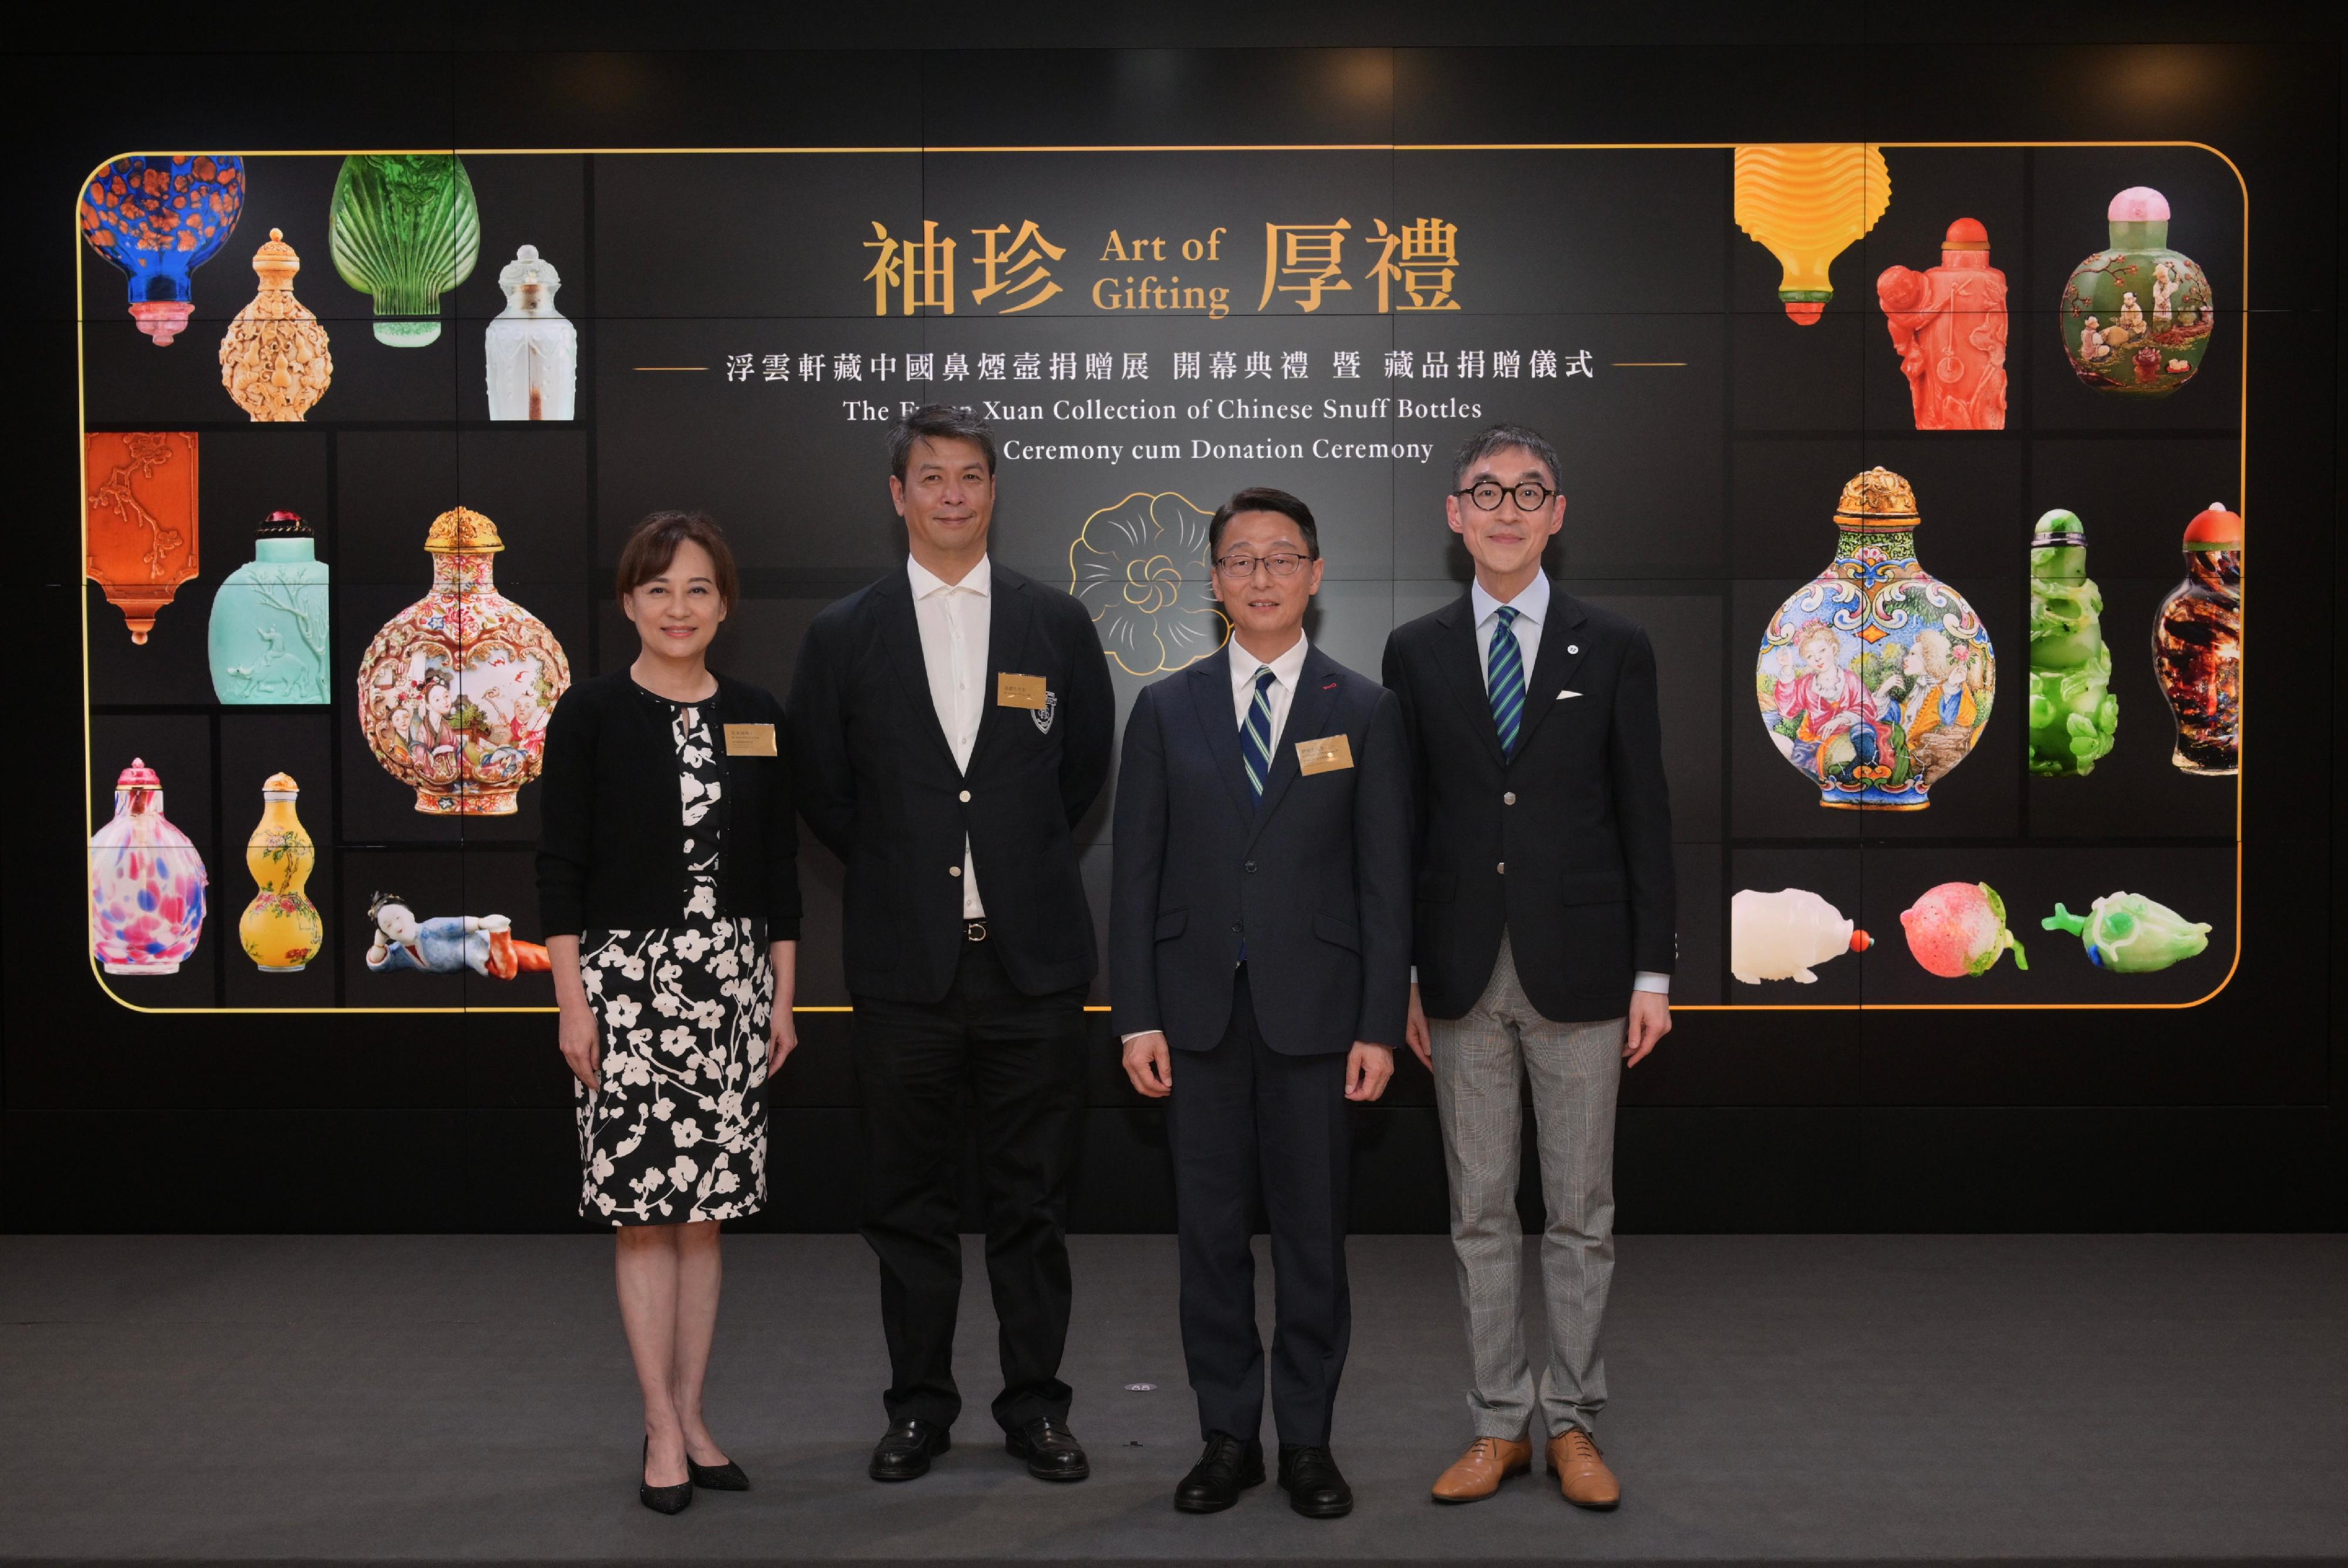 The opening ceremony of the "Art of Gifting: The Fuyun Xuan Collection of Chinese Snuff Bottles" exhibition and donation ceremony was held today (April 11) at the Hong Kong Museum of Art. Photo shows (from left) officiating guests including the Museum Director of the HKMoA, Dr Maria Mok; the son of Mr Christopher Sin and Mrs Josephine Sin, Mr Nicholas Sin; the Director of Leisure and Cultural Services, Mr Vincent Liu; and the Chairman of the Museum Advisory Committee, Professor Douglas So, during the opening ceremony.